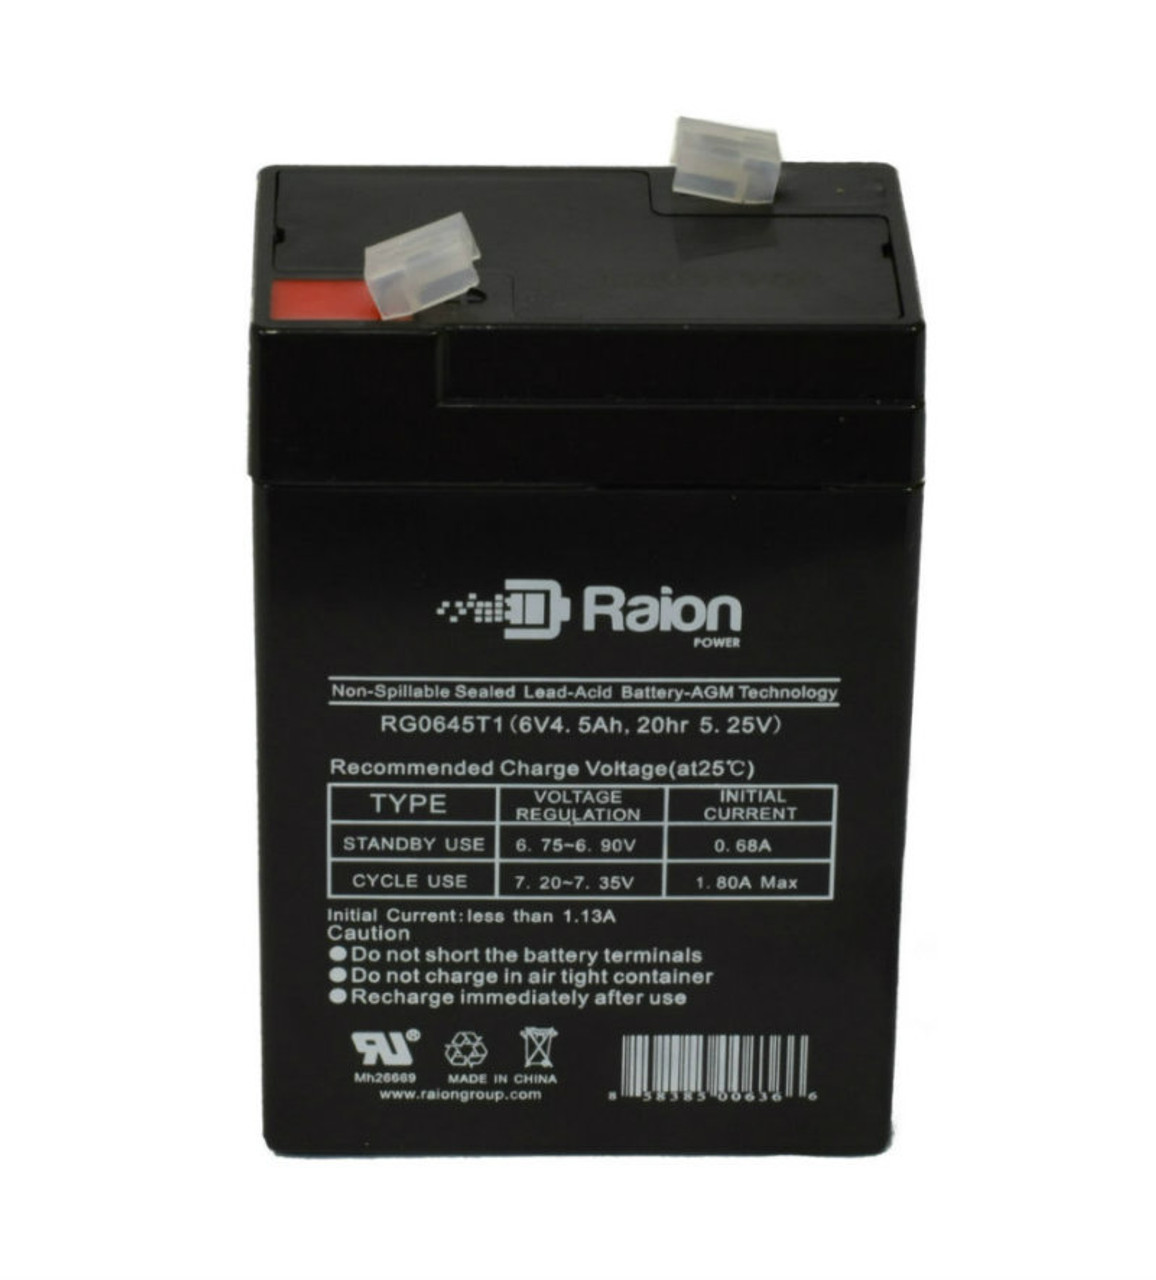 Raion Power RG0645T1 Replacement Battery Cartridge for Light Alarms 2FL1